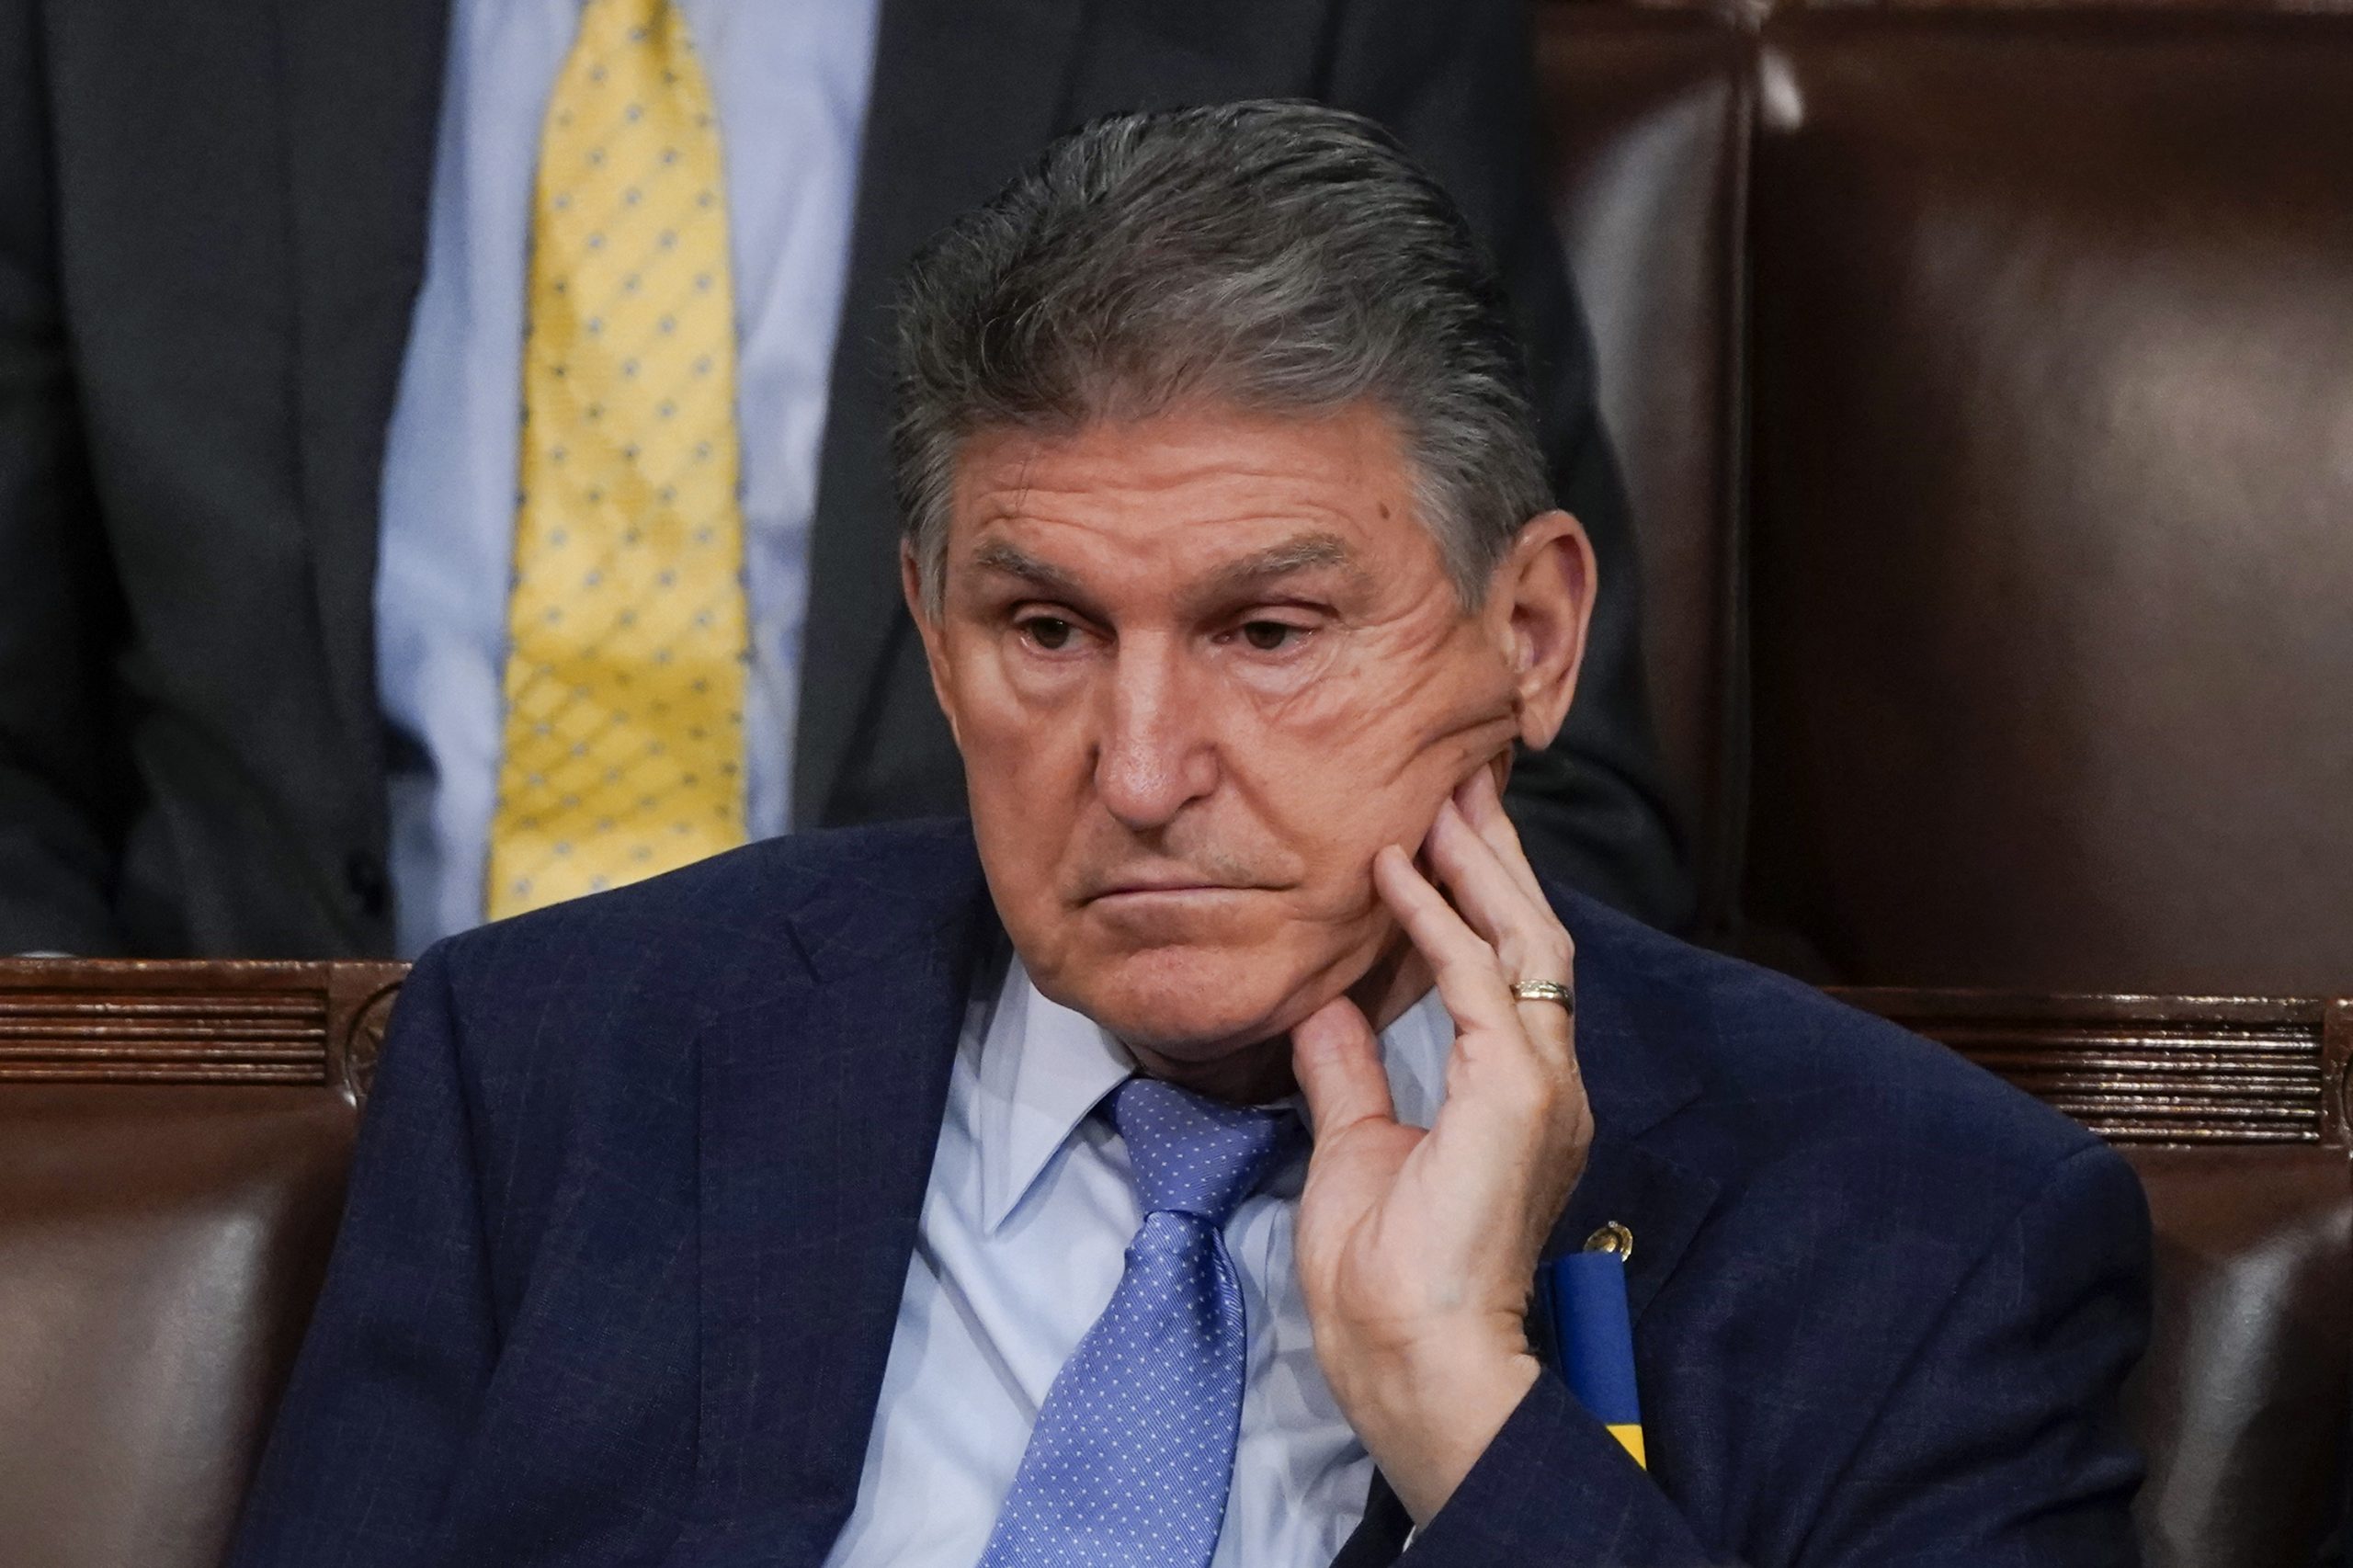 Manchin disputes claims he rejected Dems’ climate and energy spending